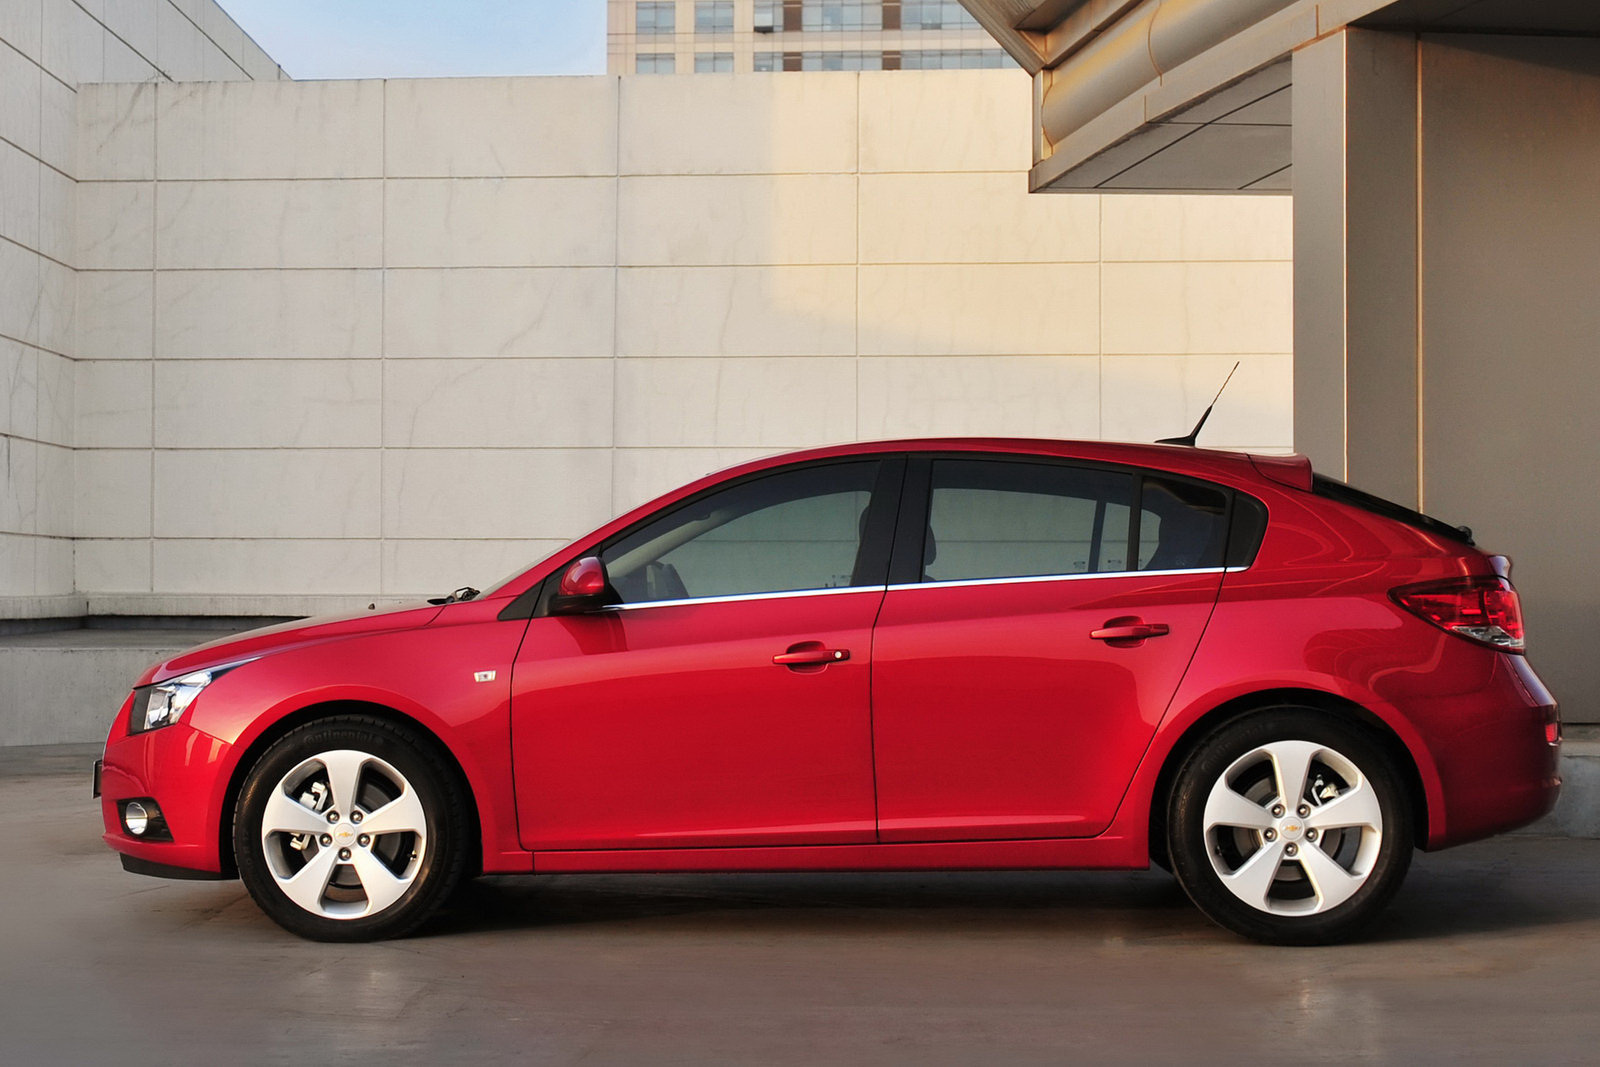 2012 Chevrolet Cruze Hatchback First Official Photos of